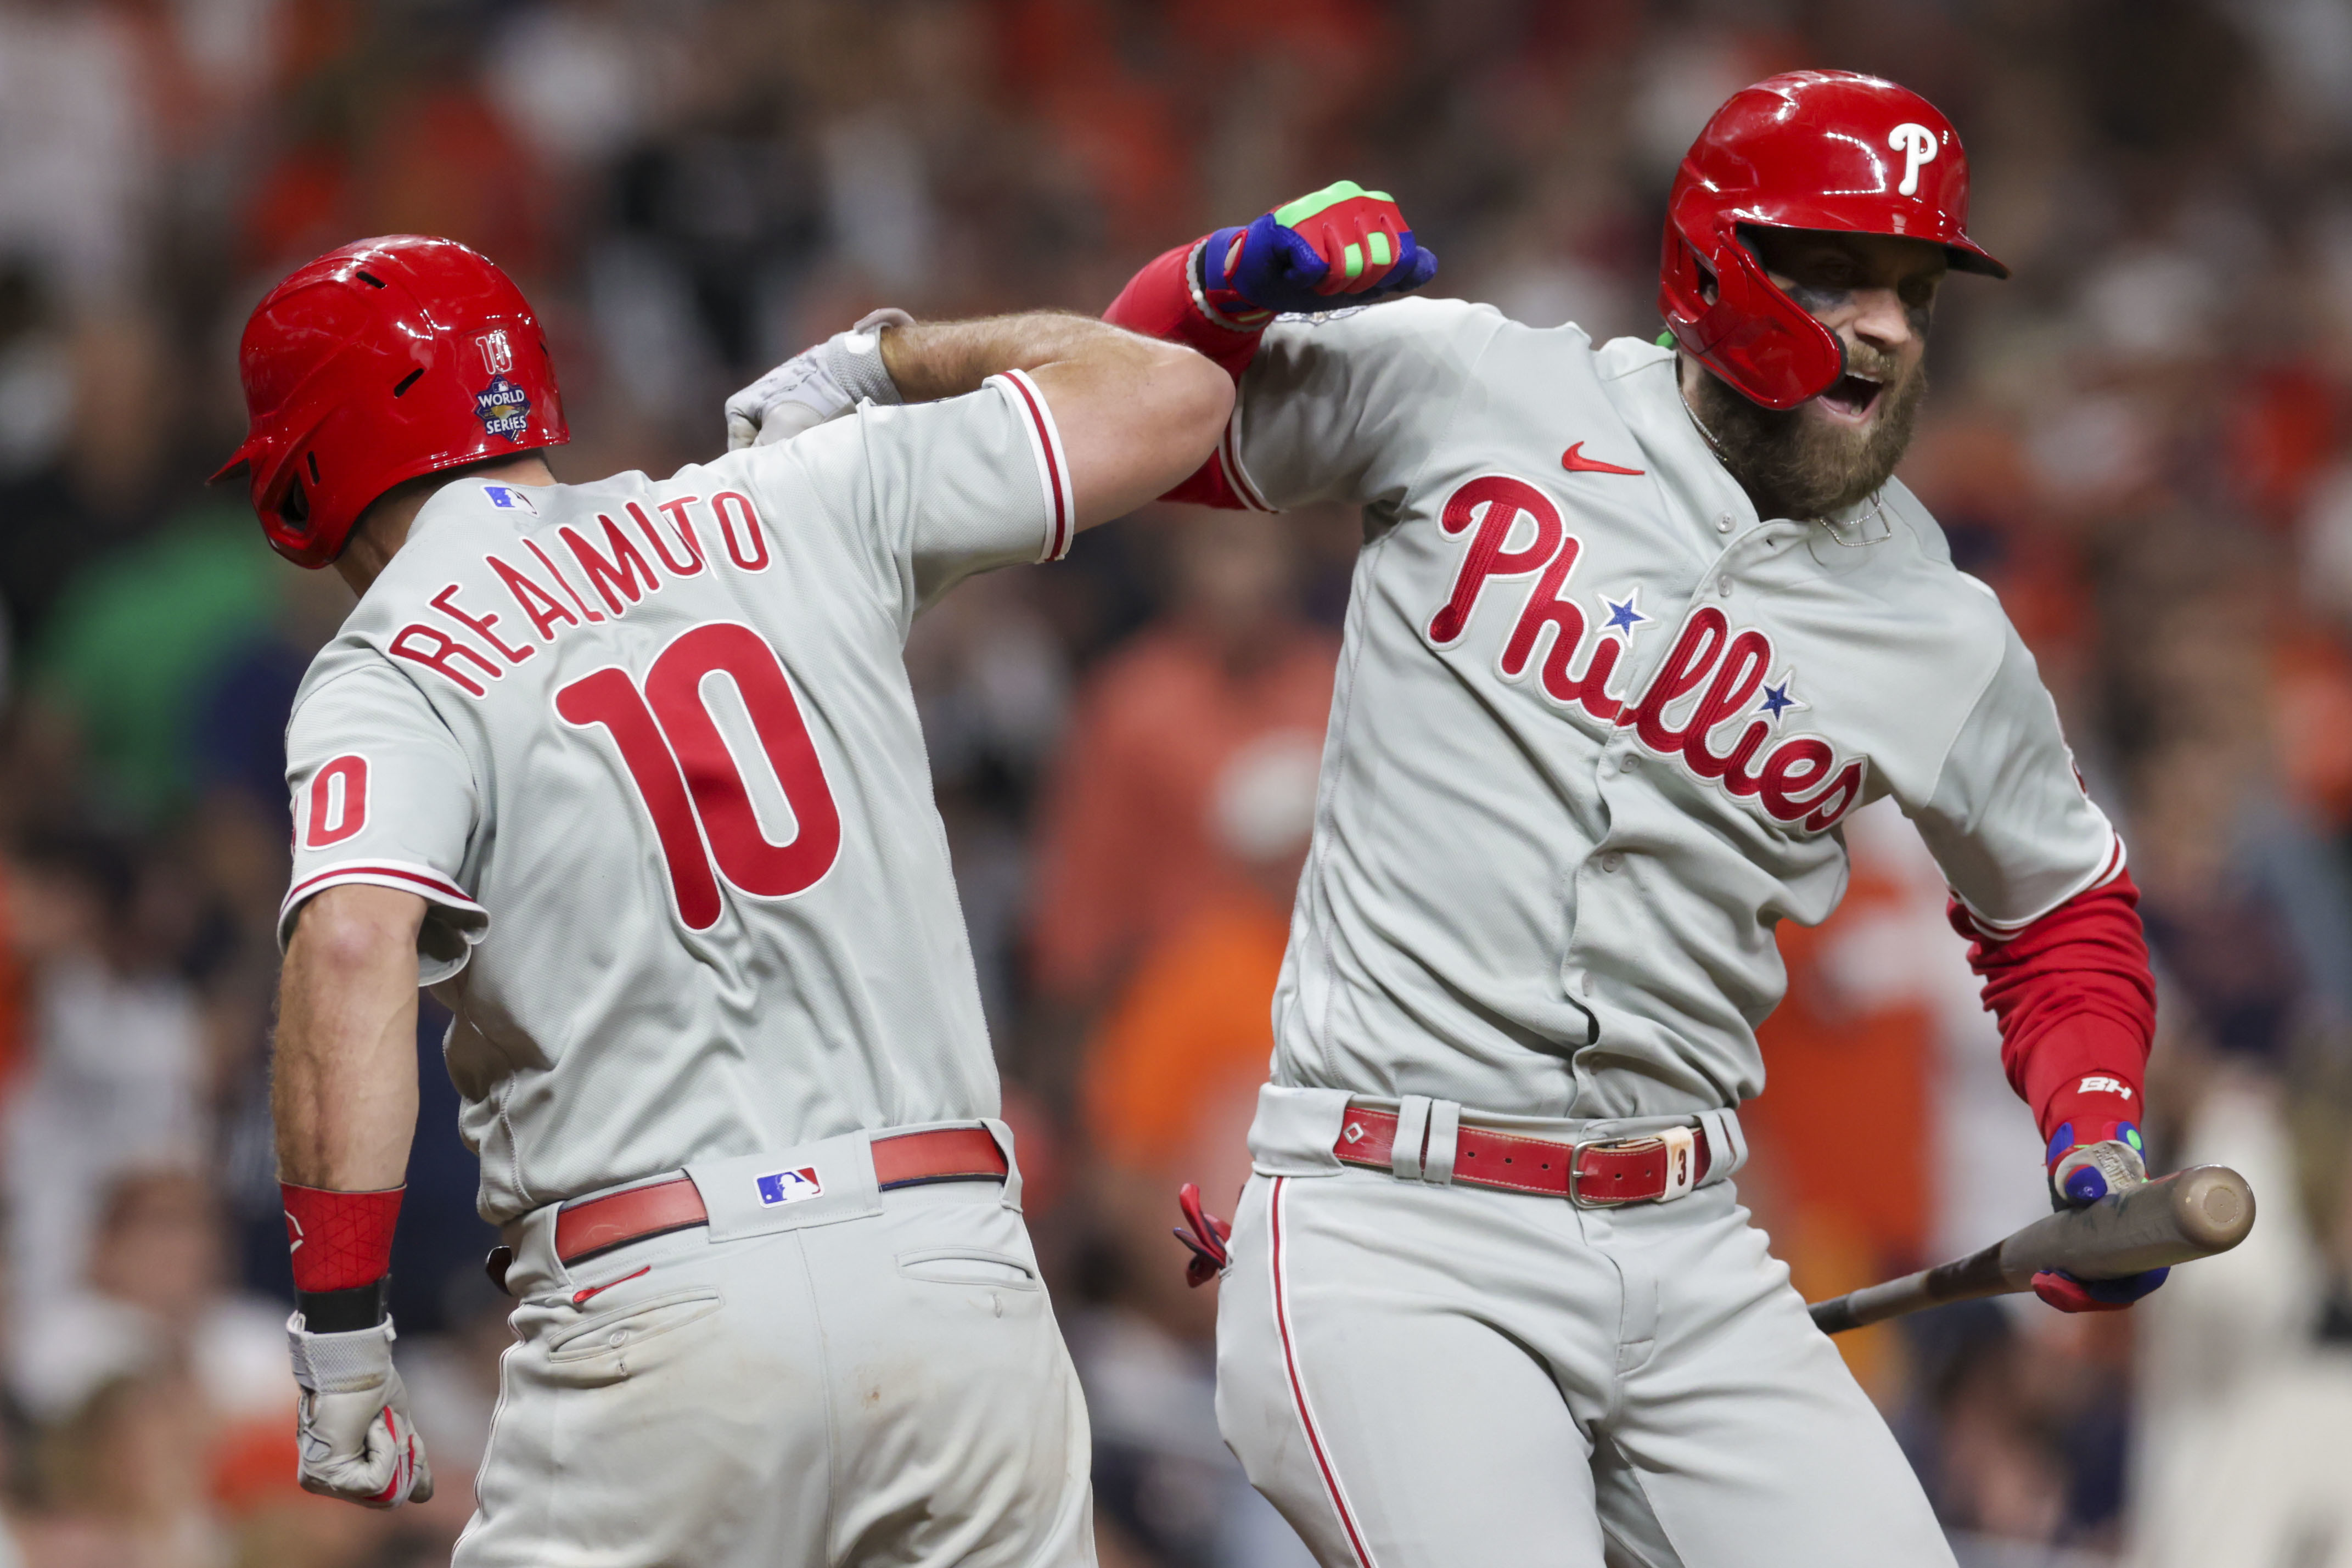 That vibe was so good': Matt Vierling, Nick Maton and the Phillies ties  that bind - The Athletic